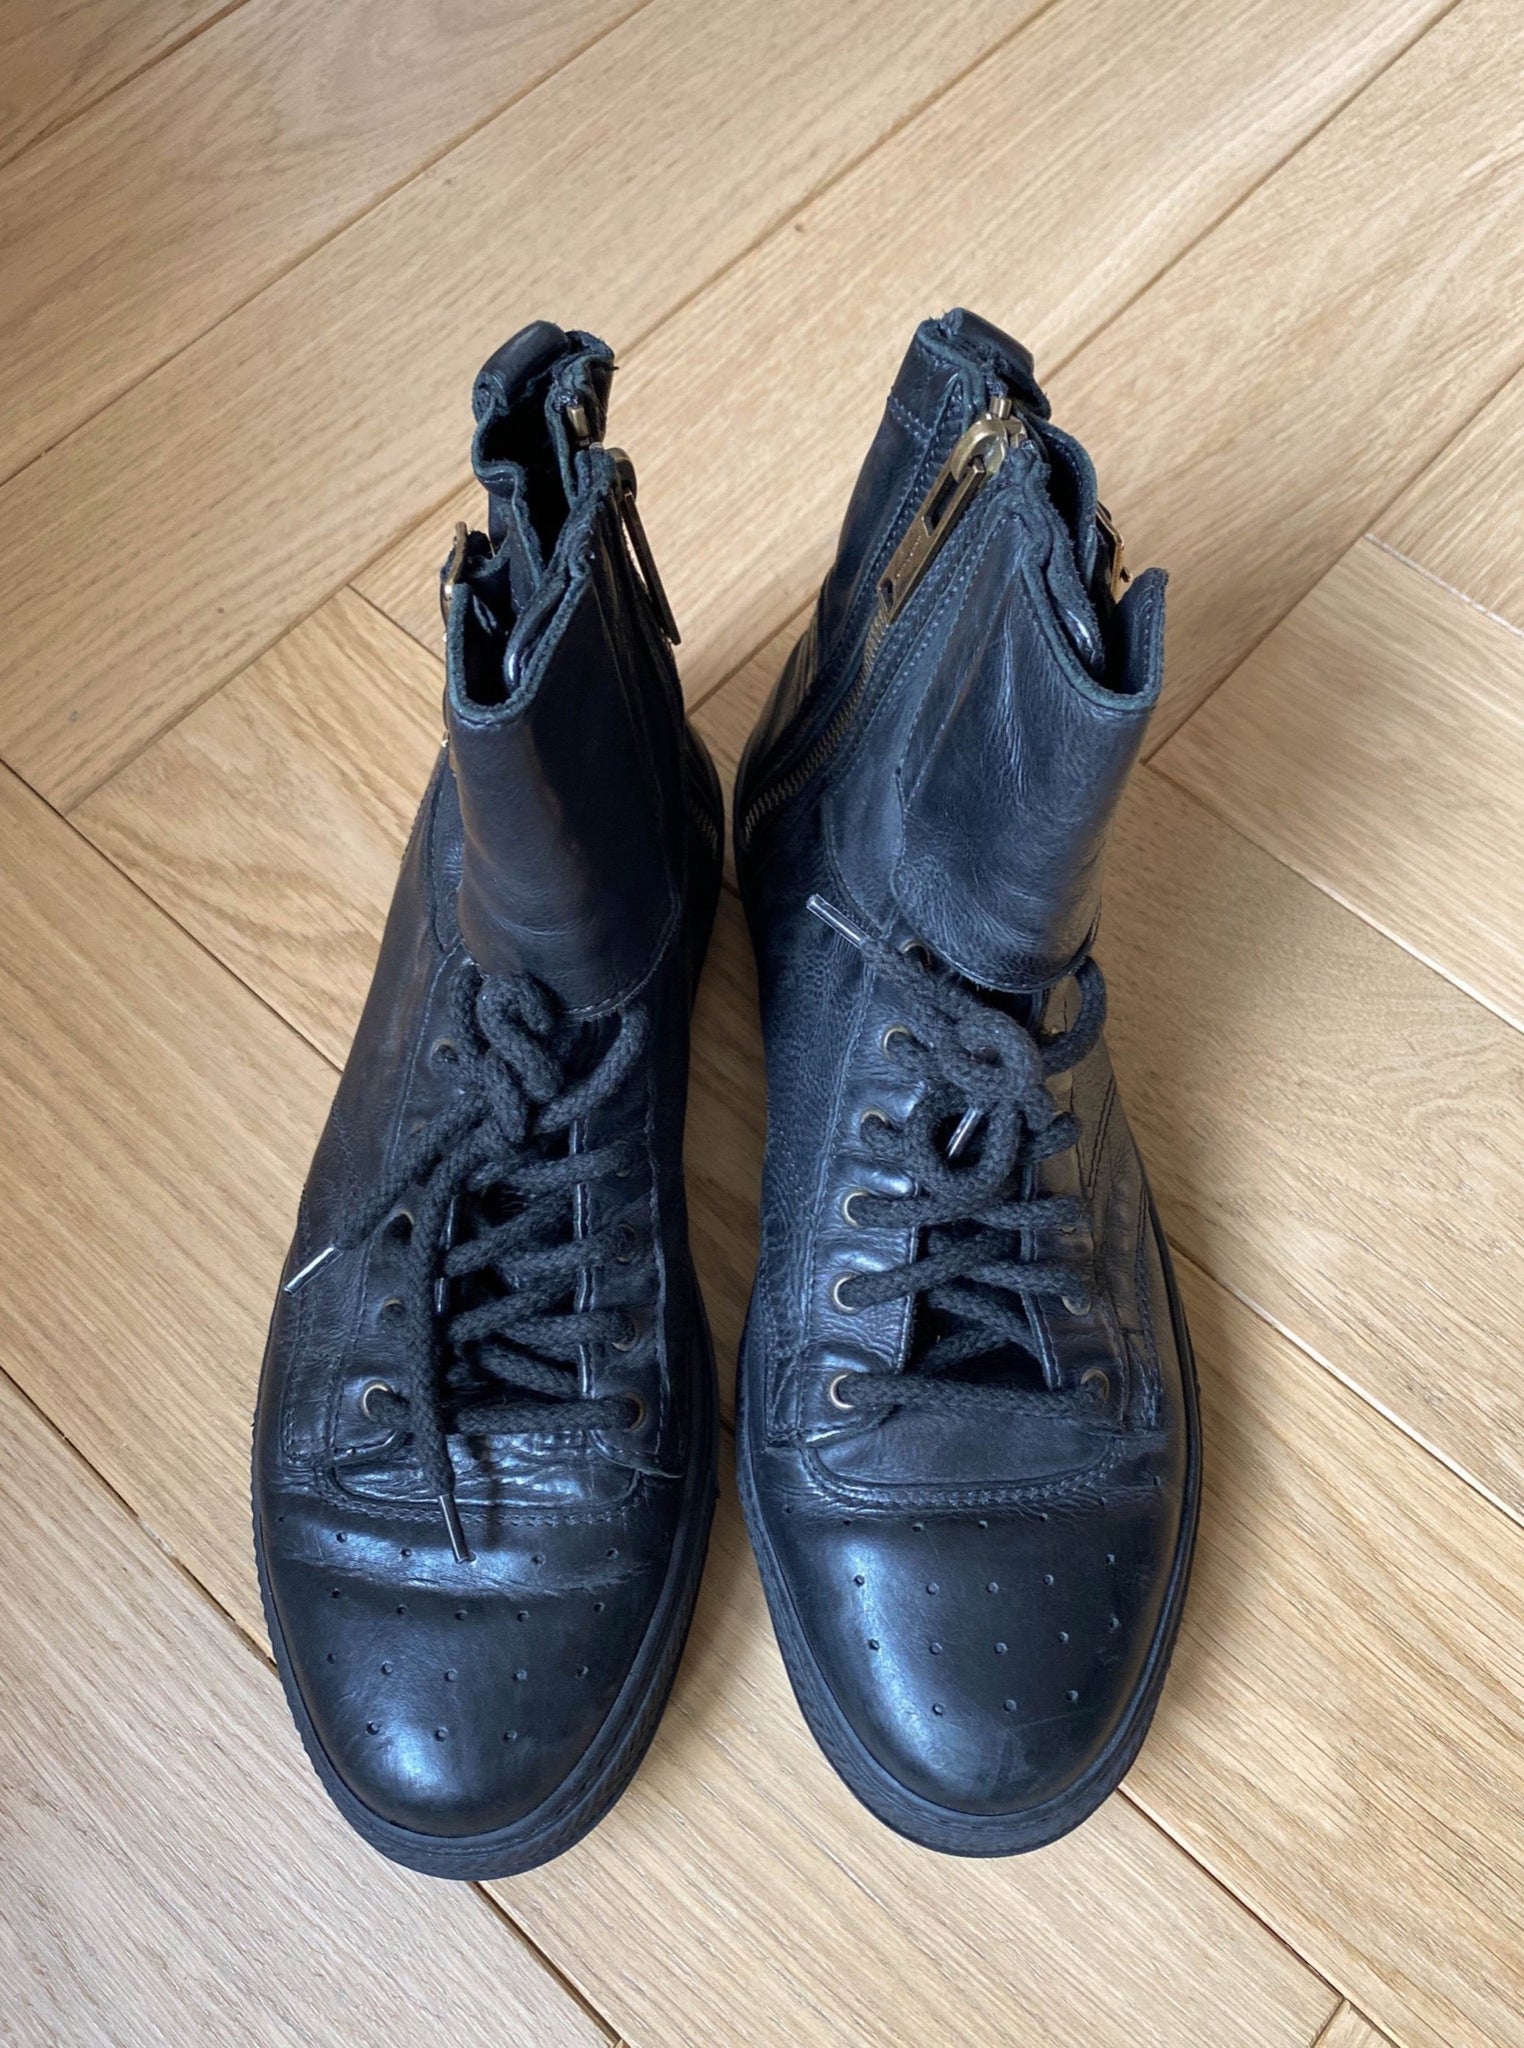 Preloved Burberry high top trainers in black leather